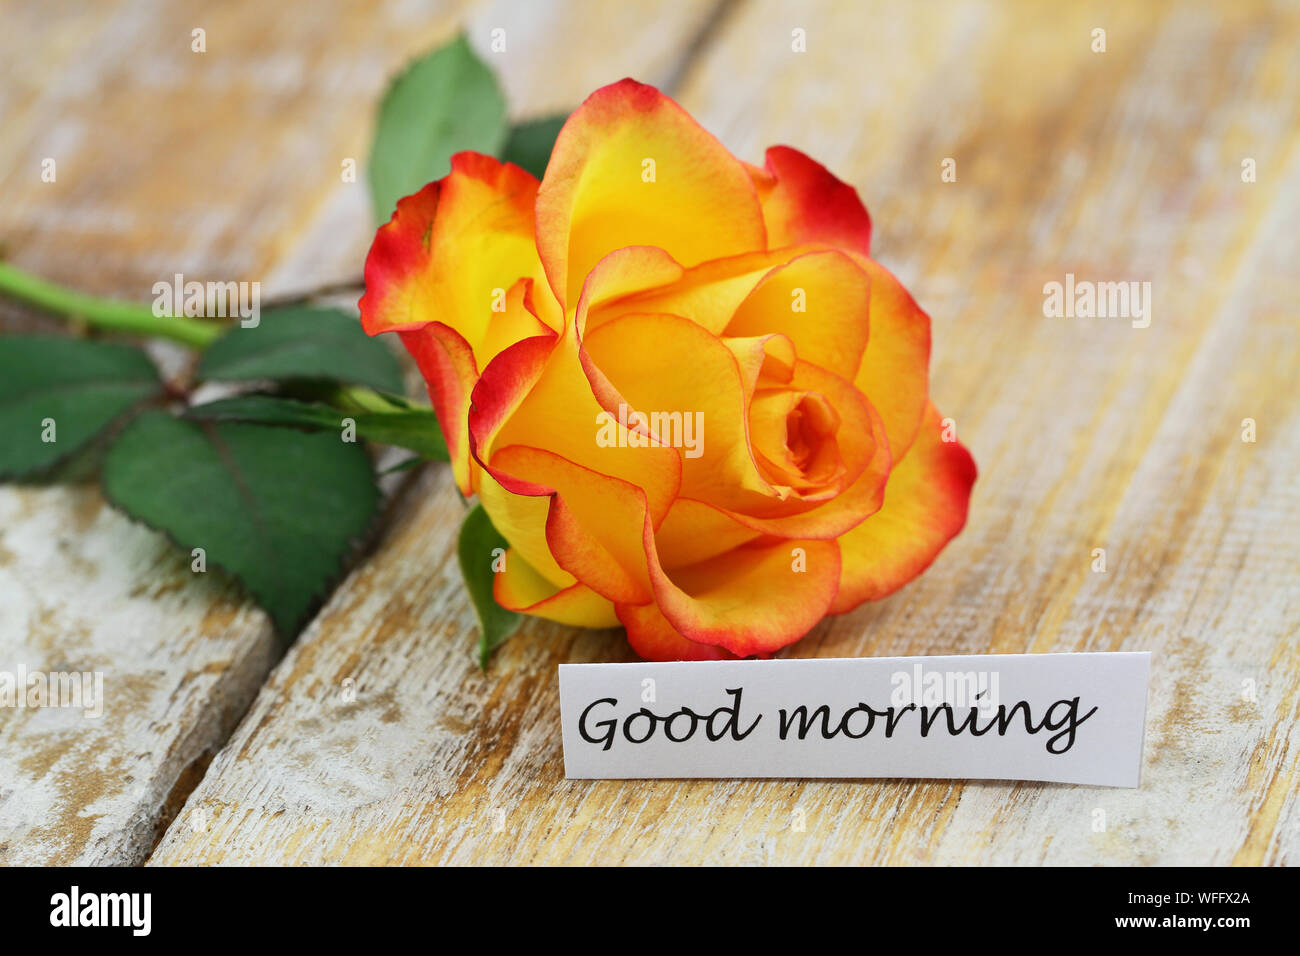 Good morning card with one red and yellow rose on rustic wooden ...